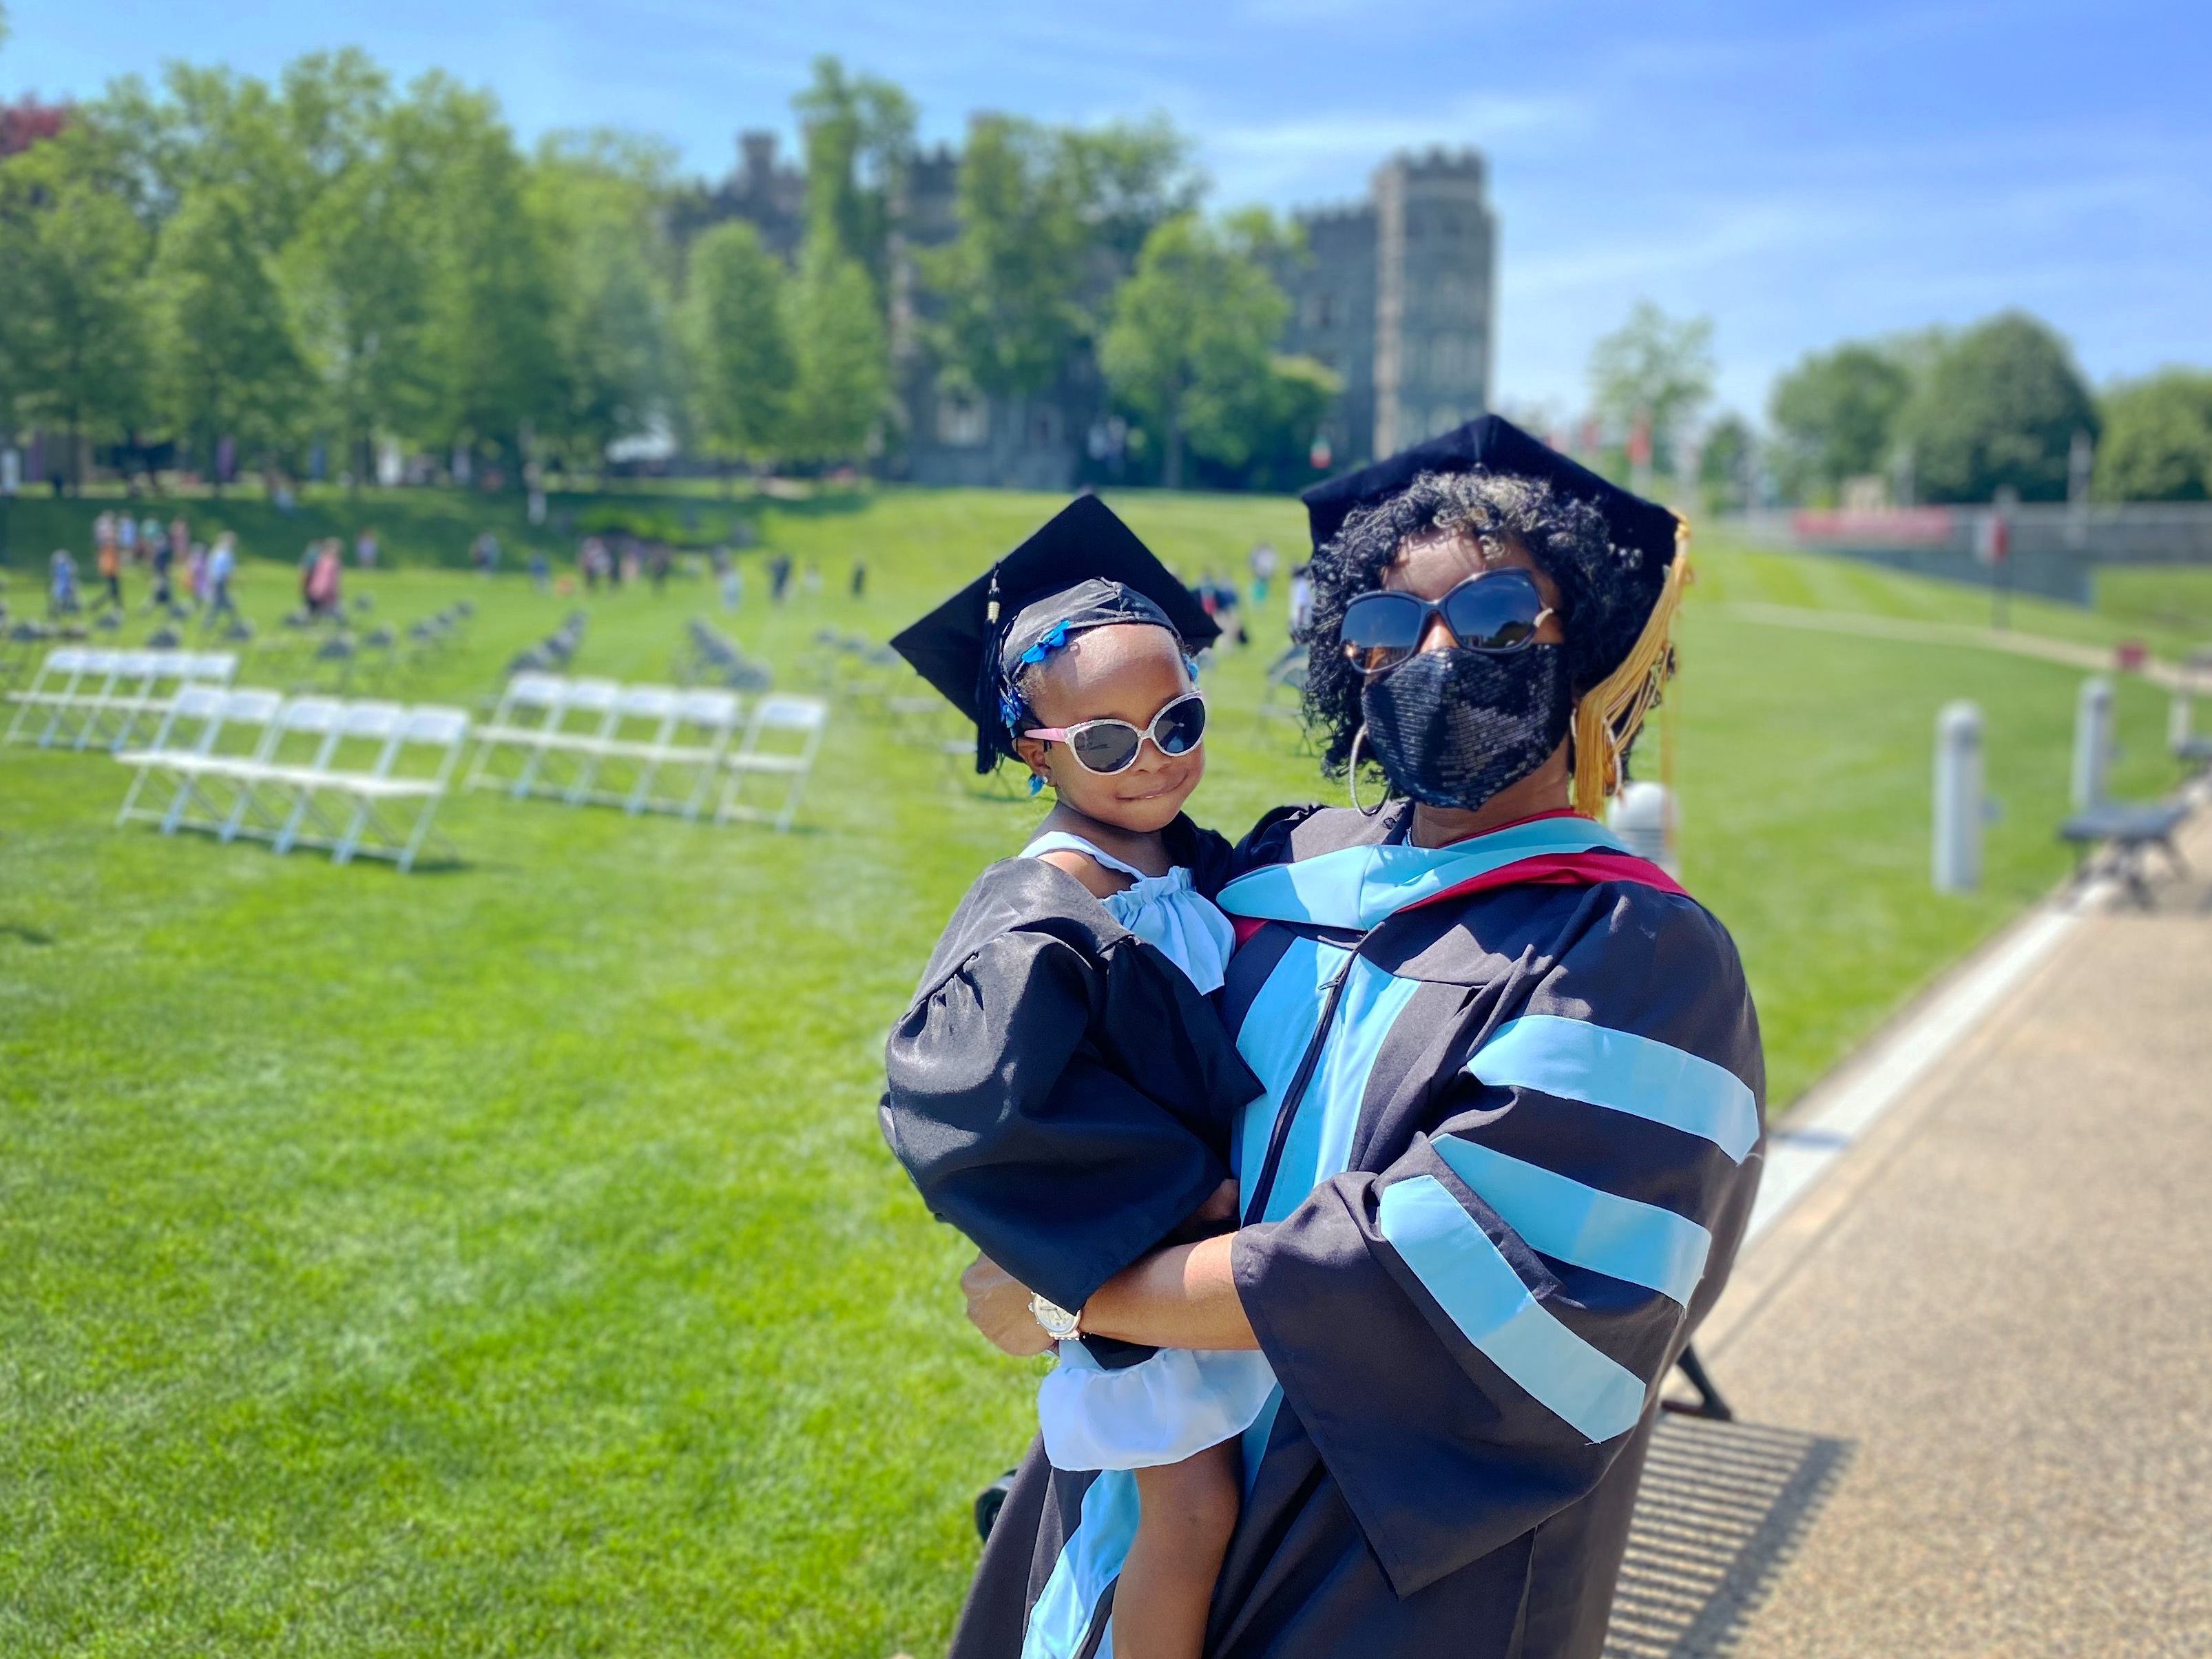 A graduating Doctorate student posing with her toddler.